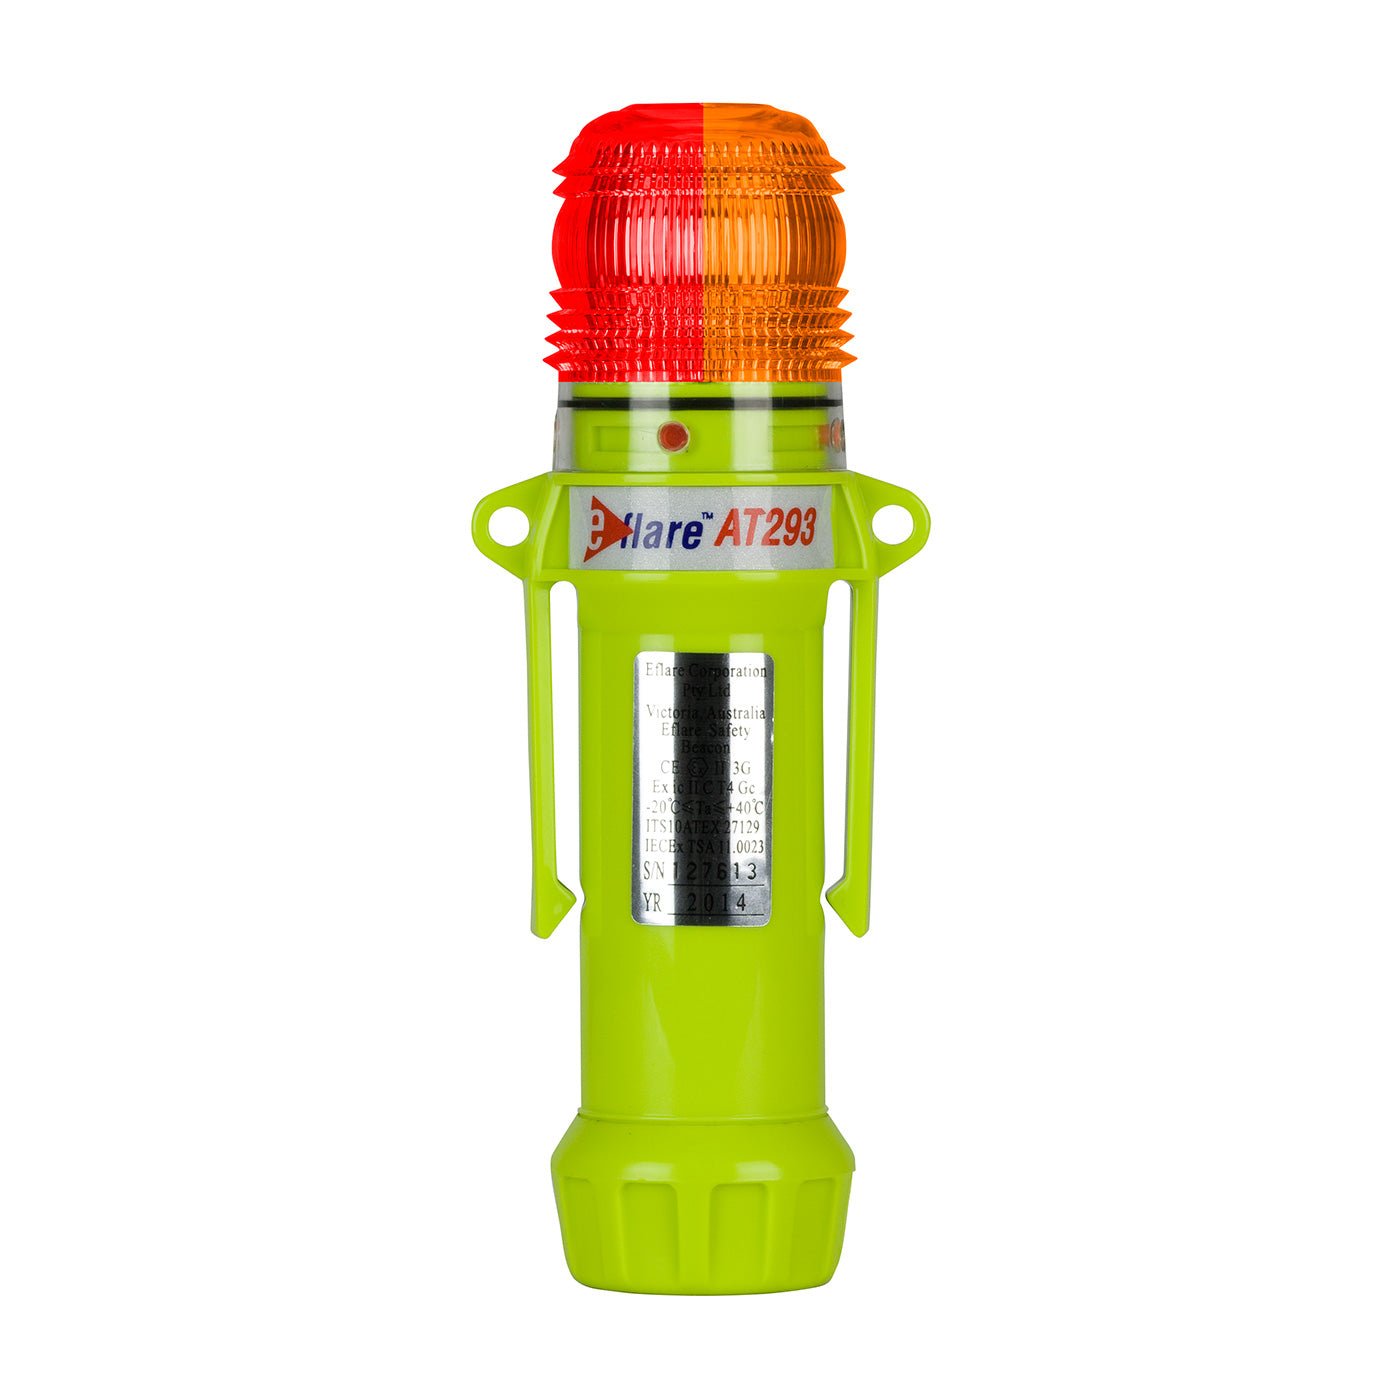 Protective Industrial Products-E-FLARE SAFETY & EMERGENCY BEACON-eSafety Supplies, Inc